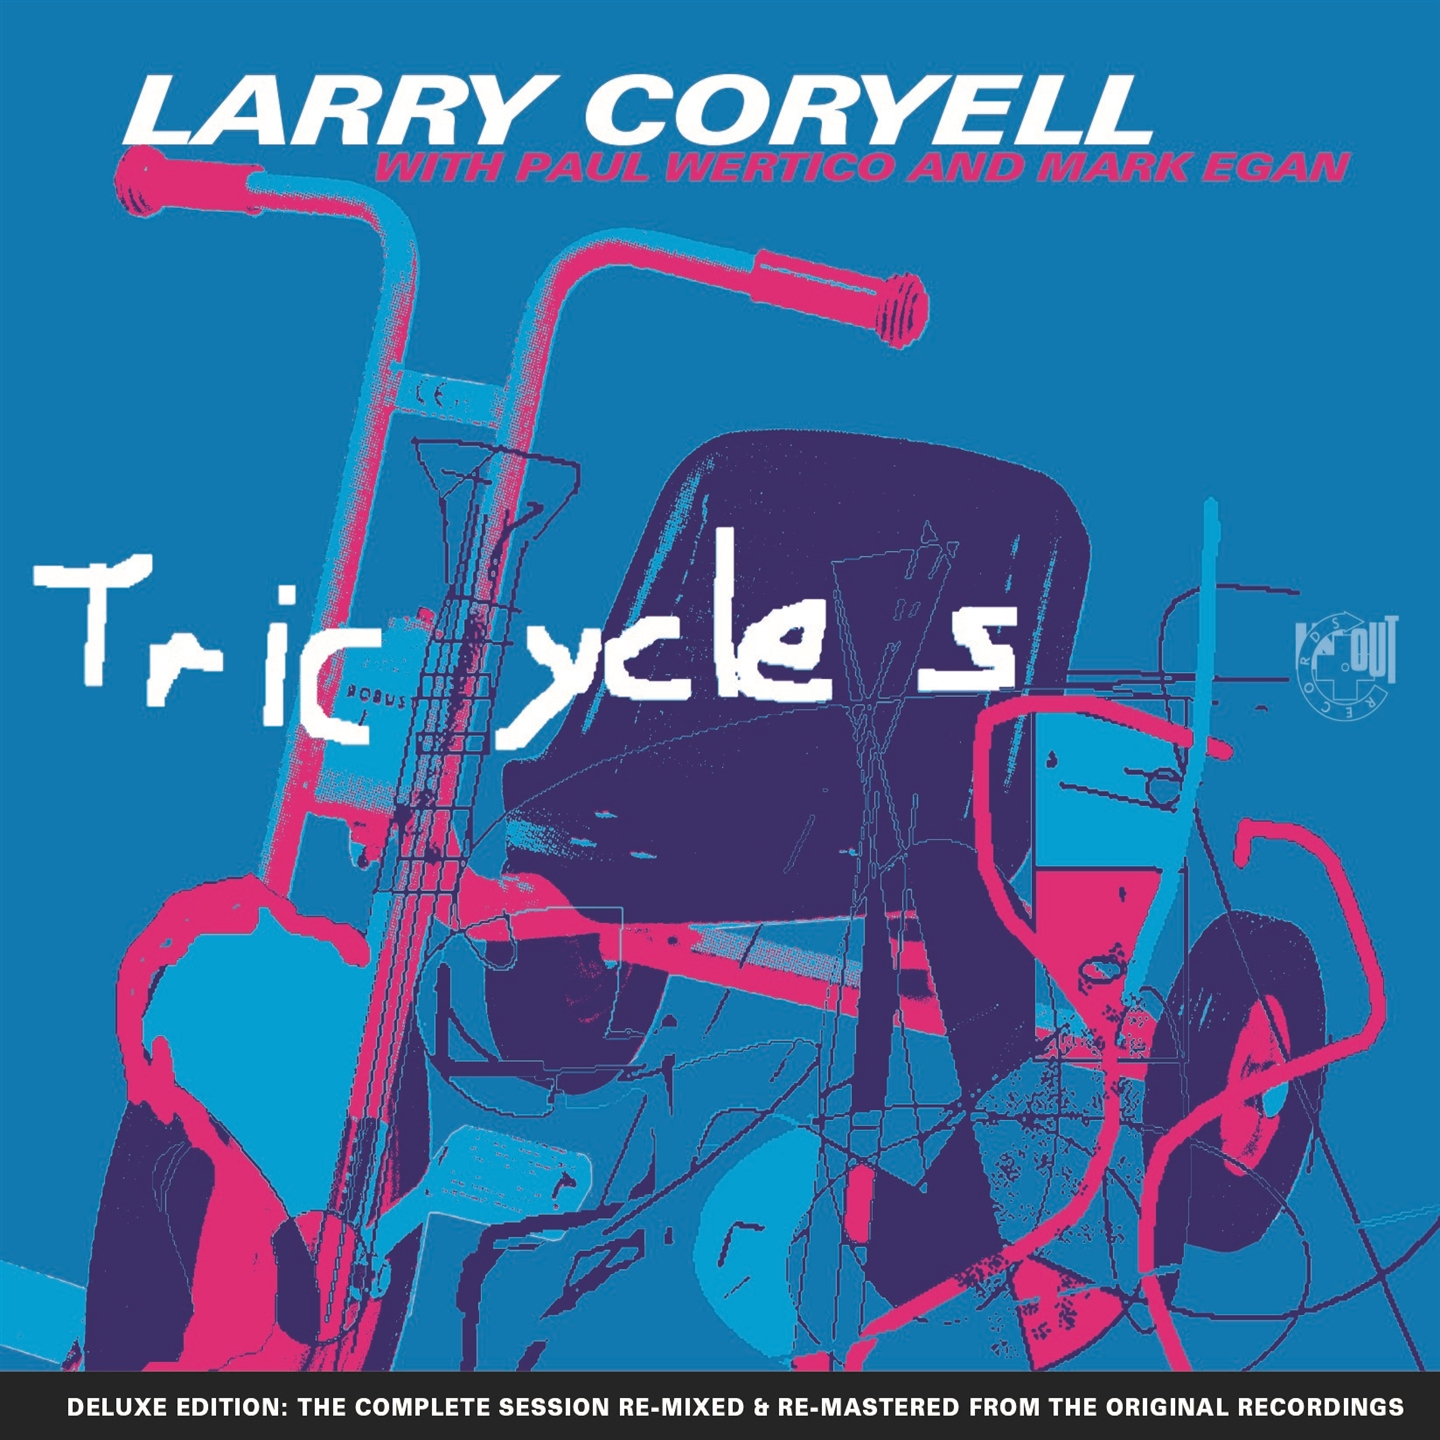 TRICYCLES [DELUXE EDITION]